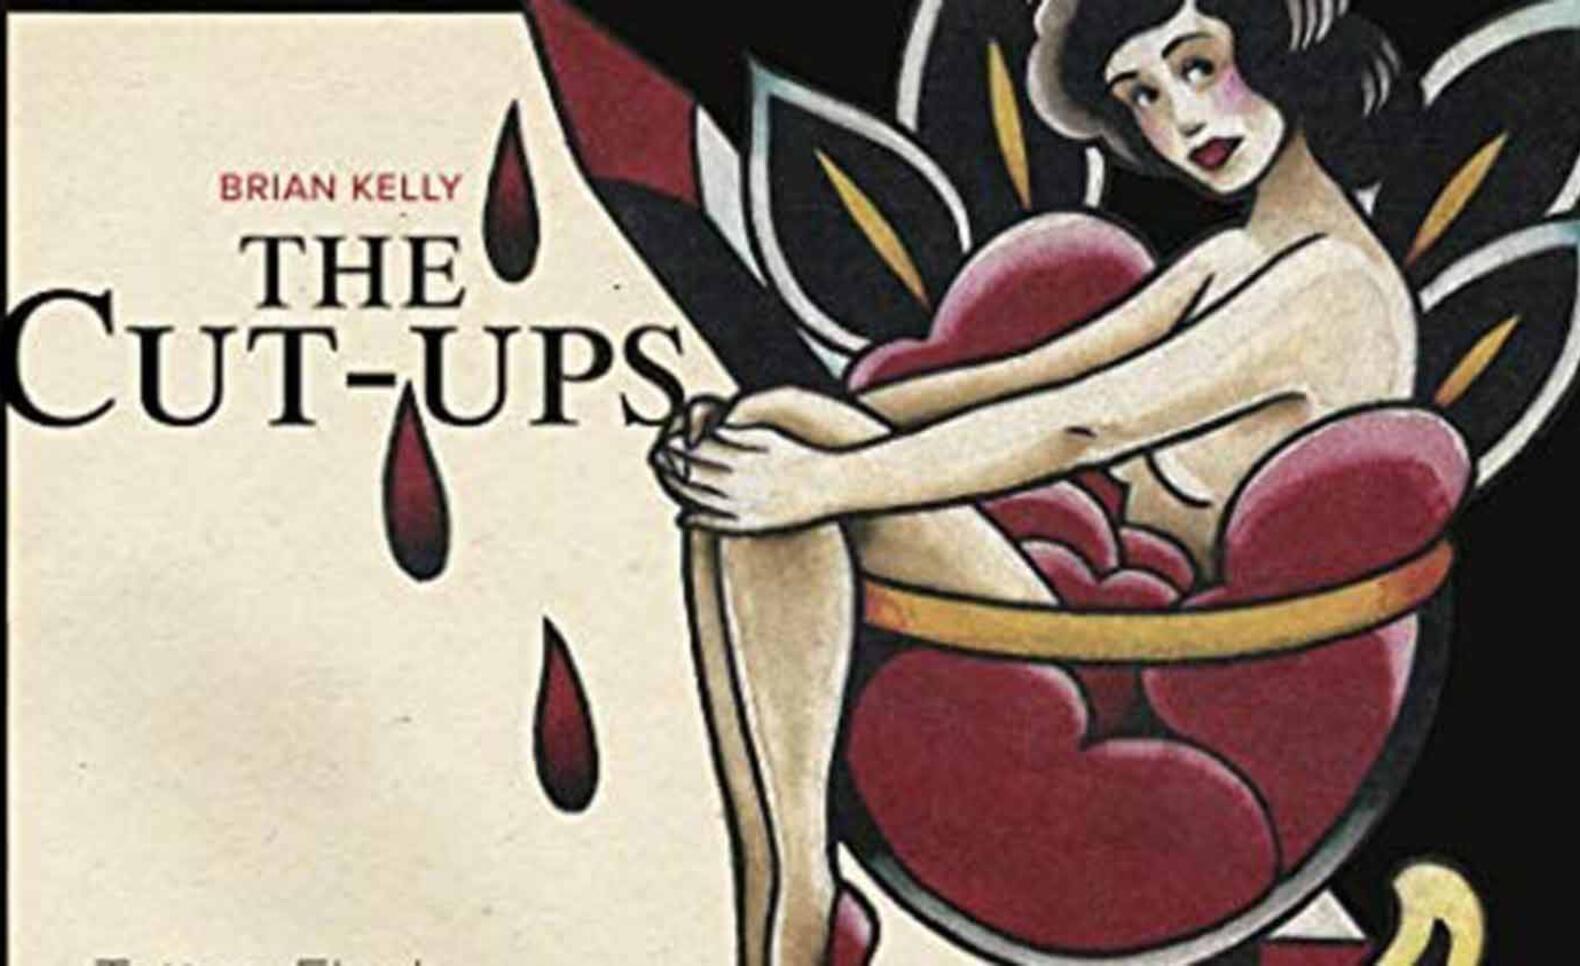 Cover of "The Cut-Ups" featuring a pin up style woman sitting in a wine glass ; Brian Kelly